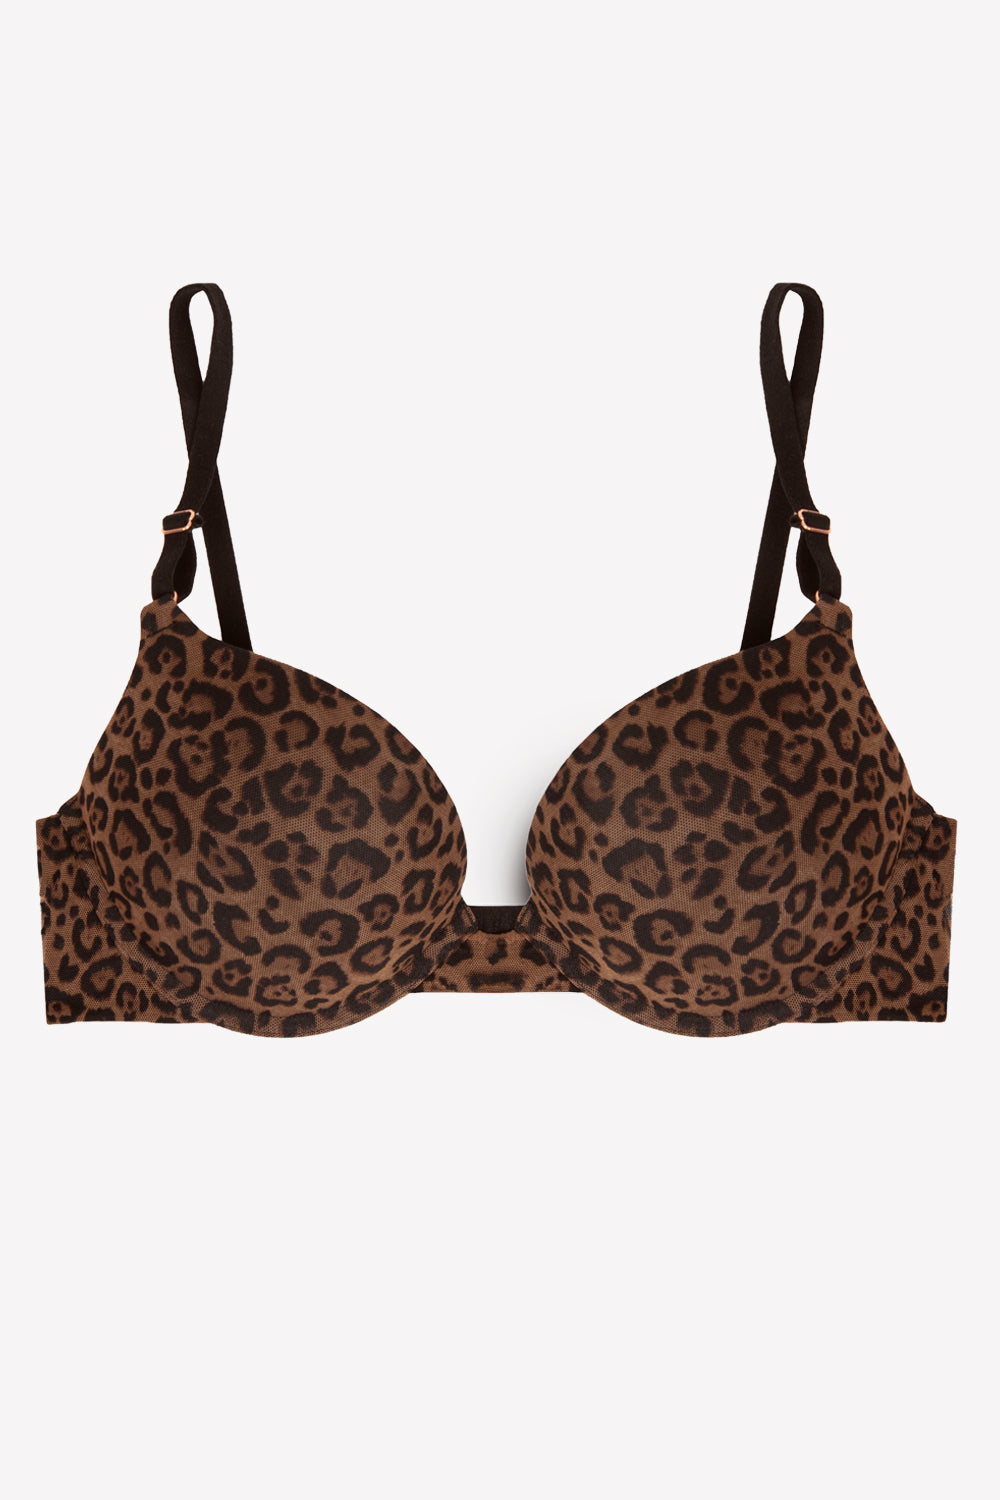 MengShan Leopard Print Large Size Bras With Front Buckle And Thin Back Plus  Push Up For Women Big Size From Changkuku, $26.92